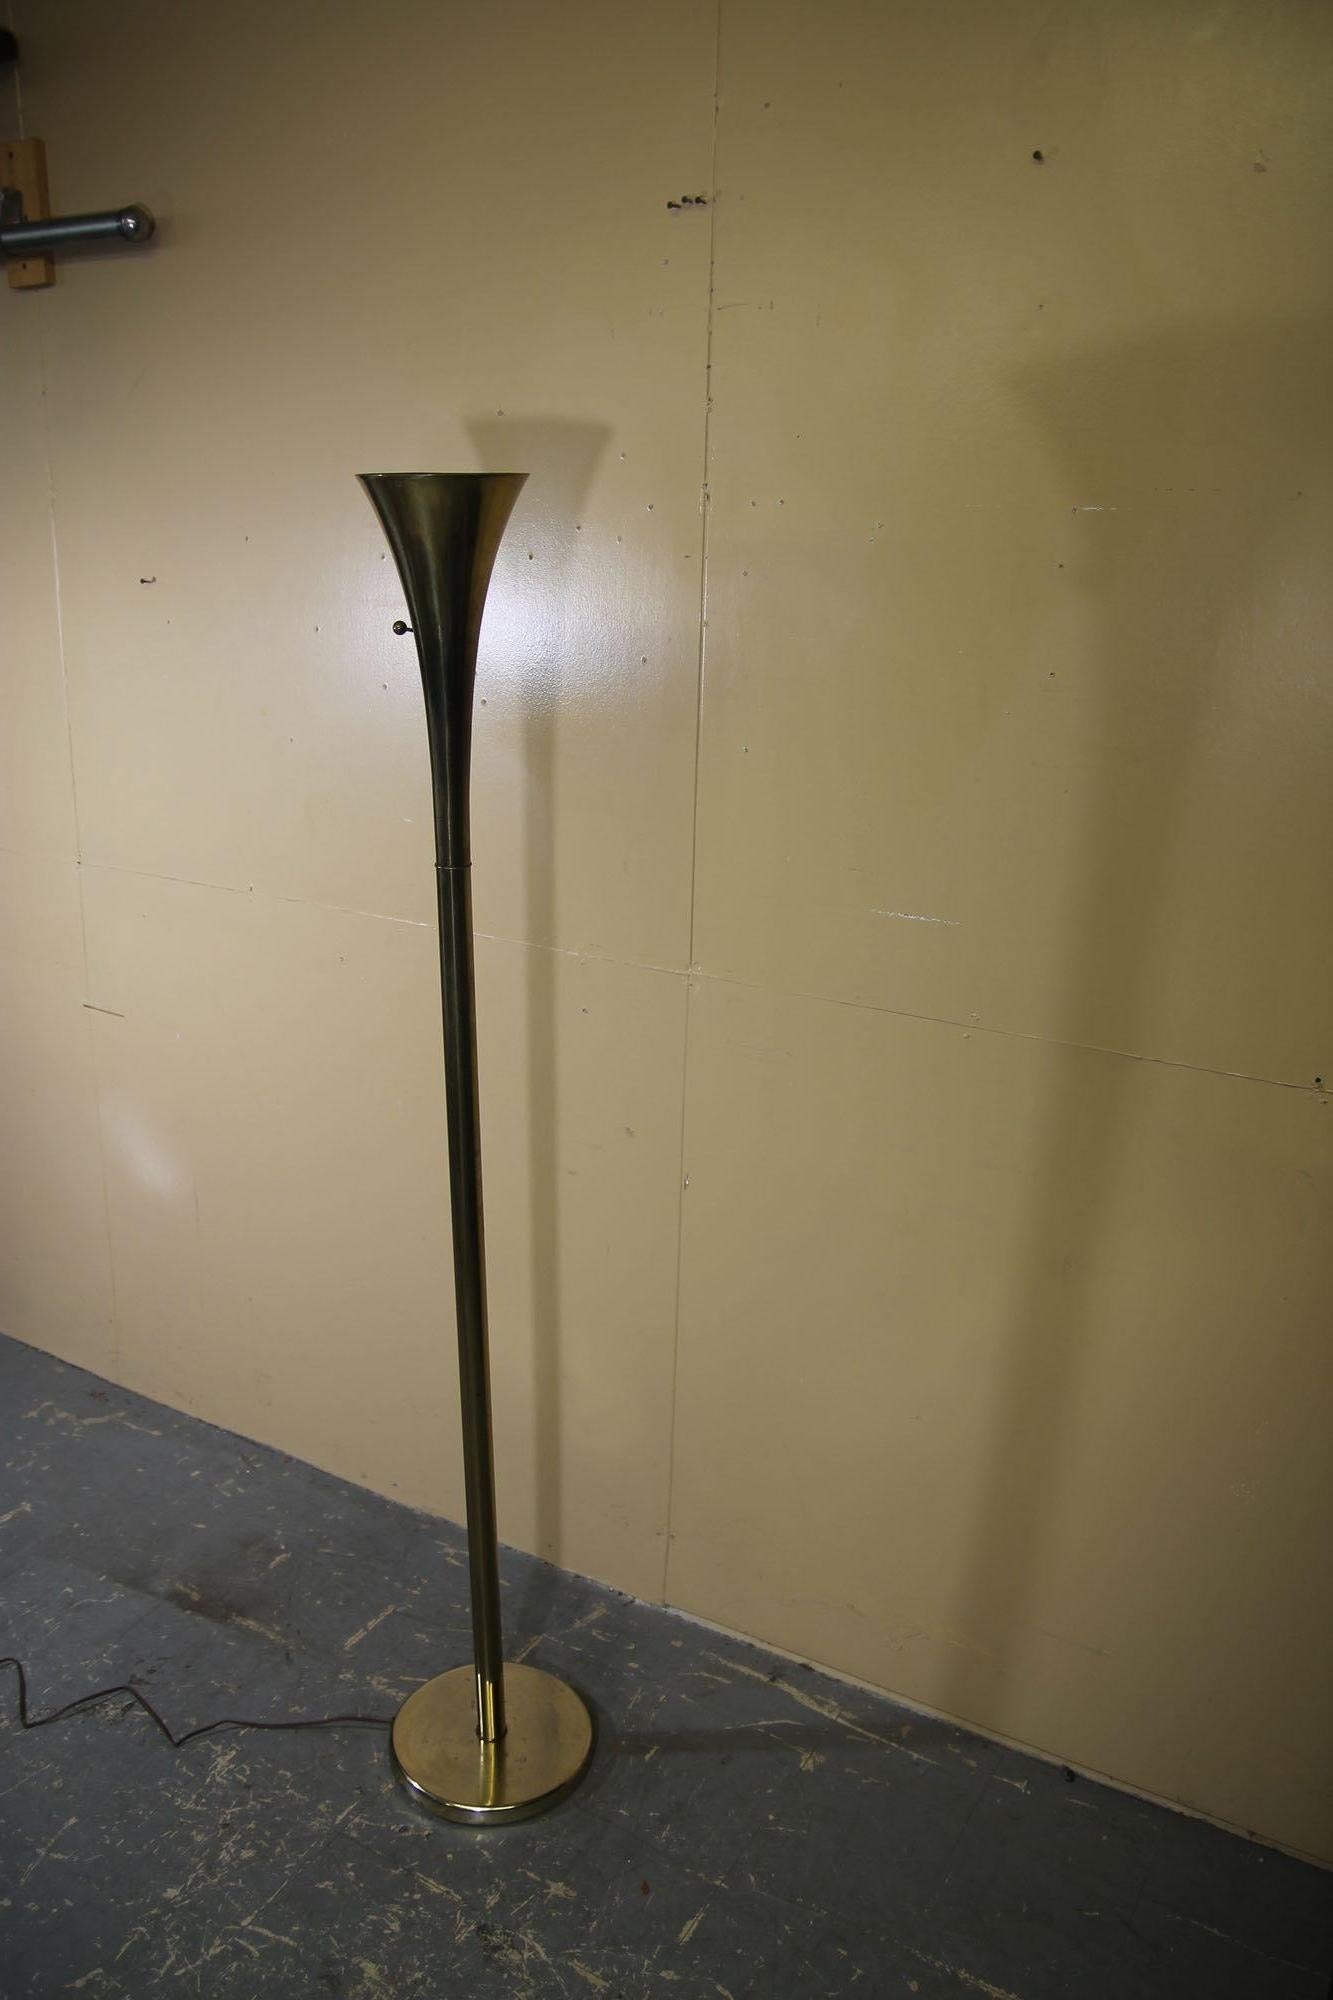 Brass Torchiere by the Laurel Lamp Co. Lamp is in nice vintage condition. Some wear to the metal on base and pole but does not distract from the great look of this floor lamp.